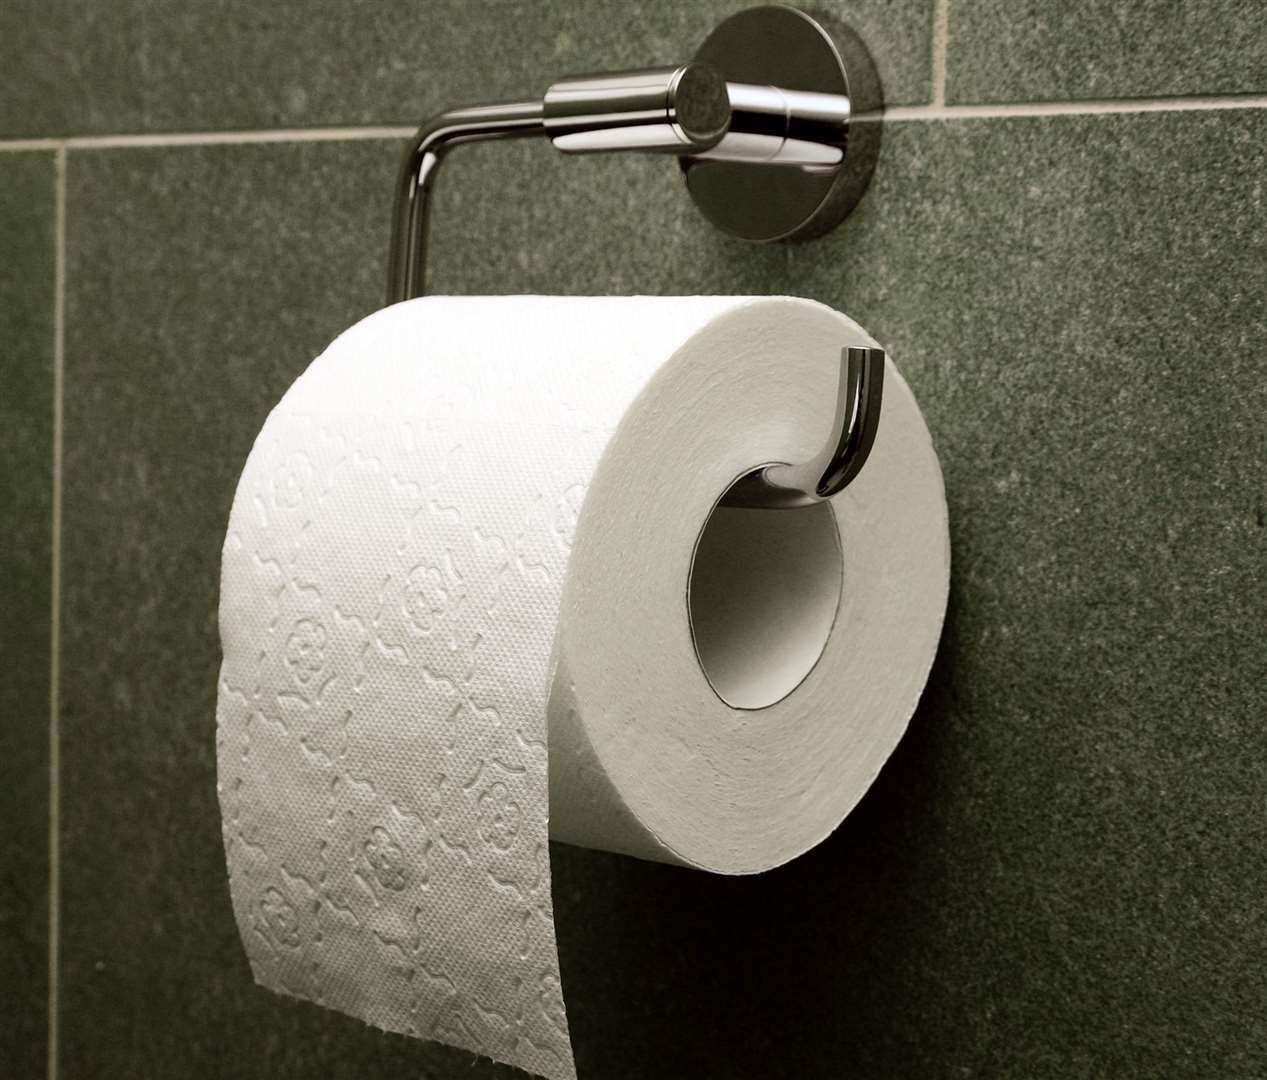 One worker claimed they were asked to bring their own loo roll in response to complaints.